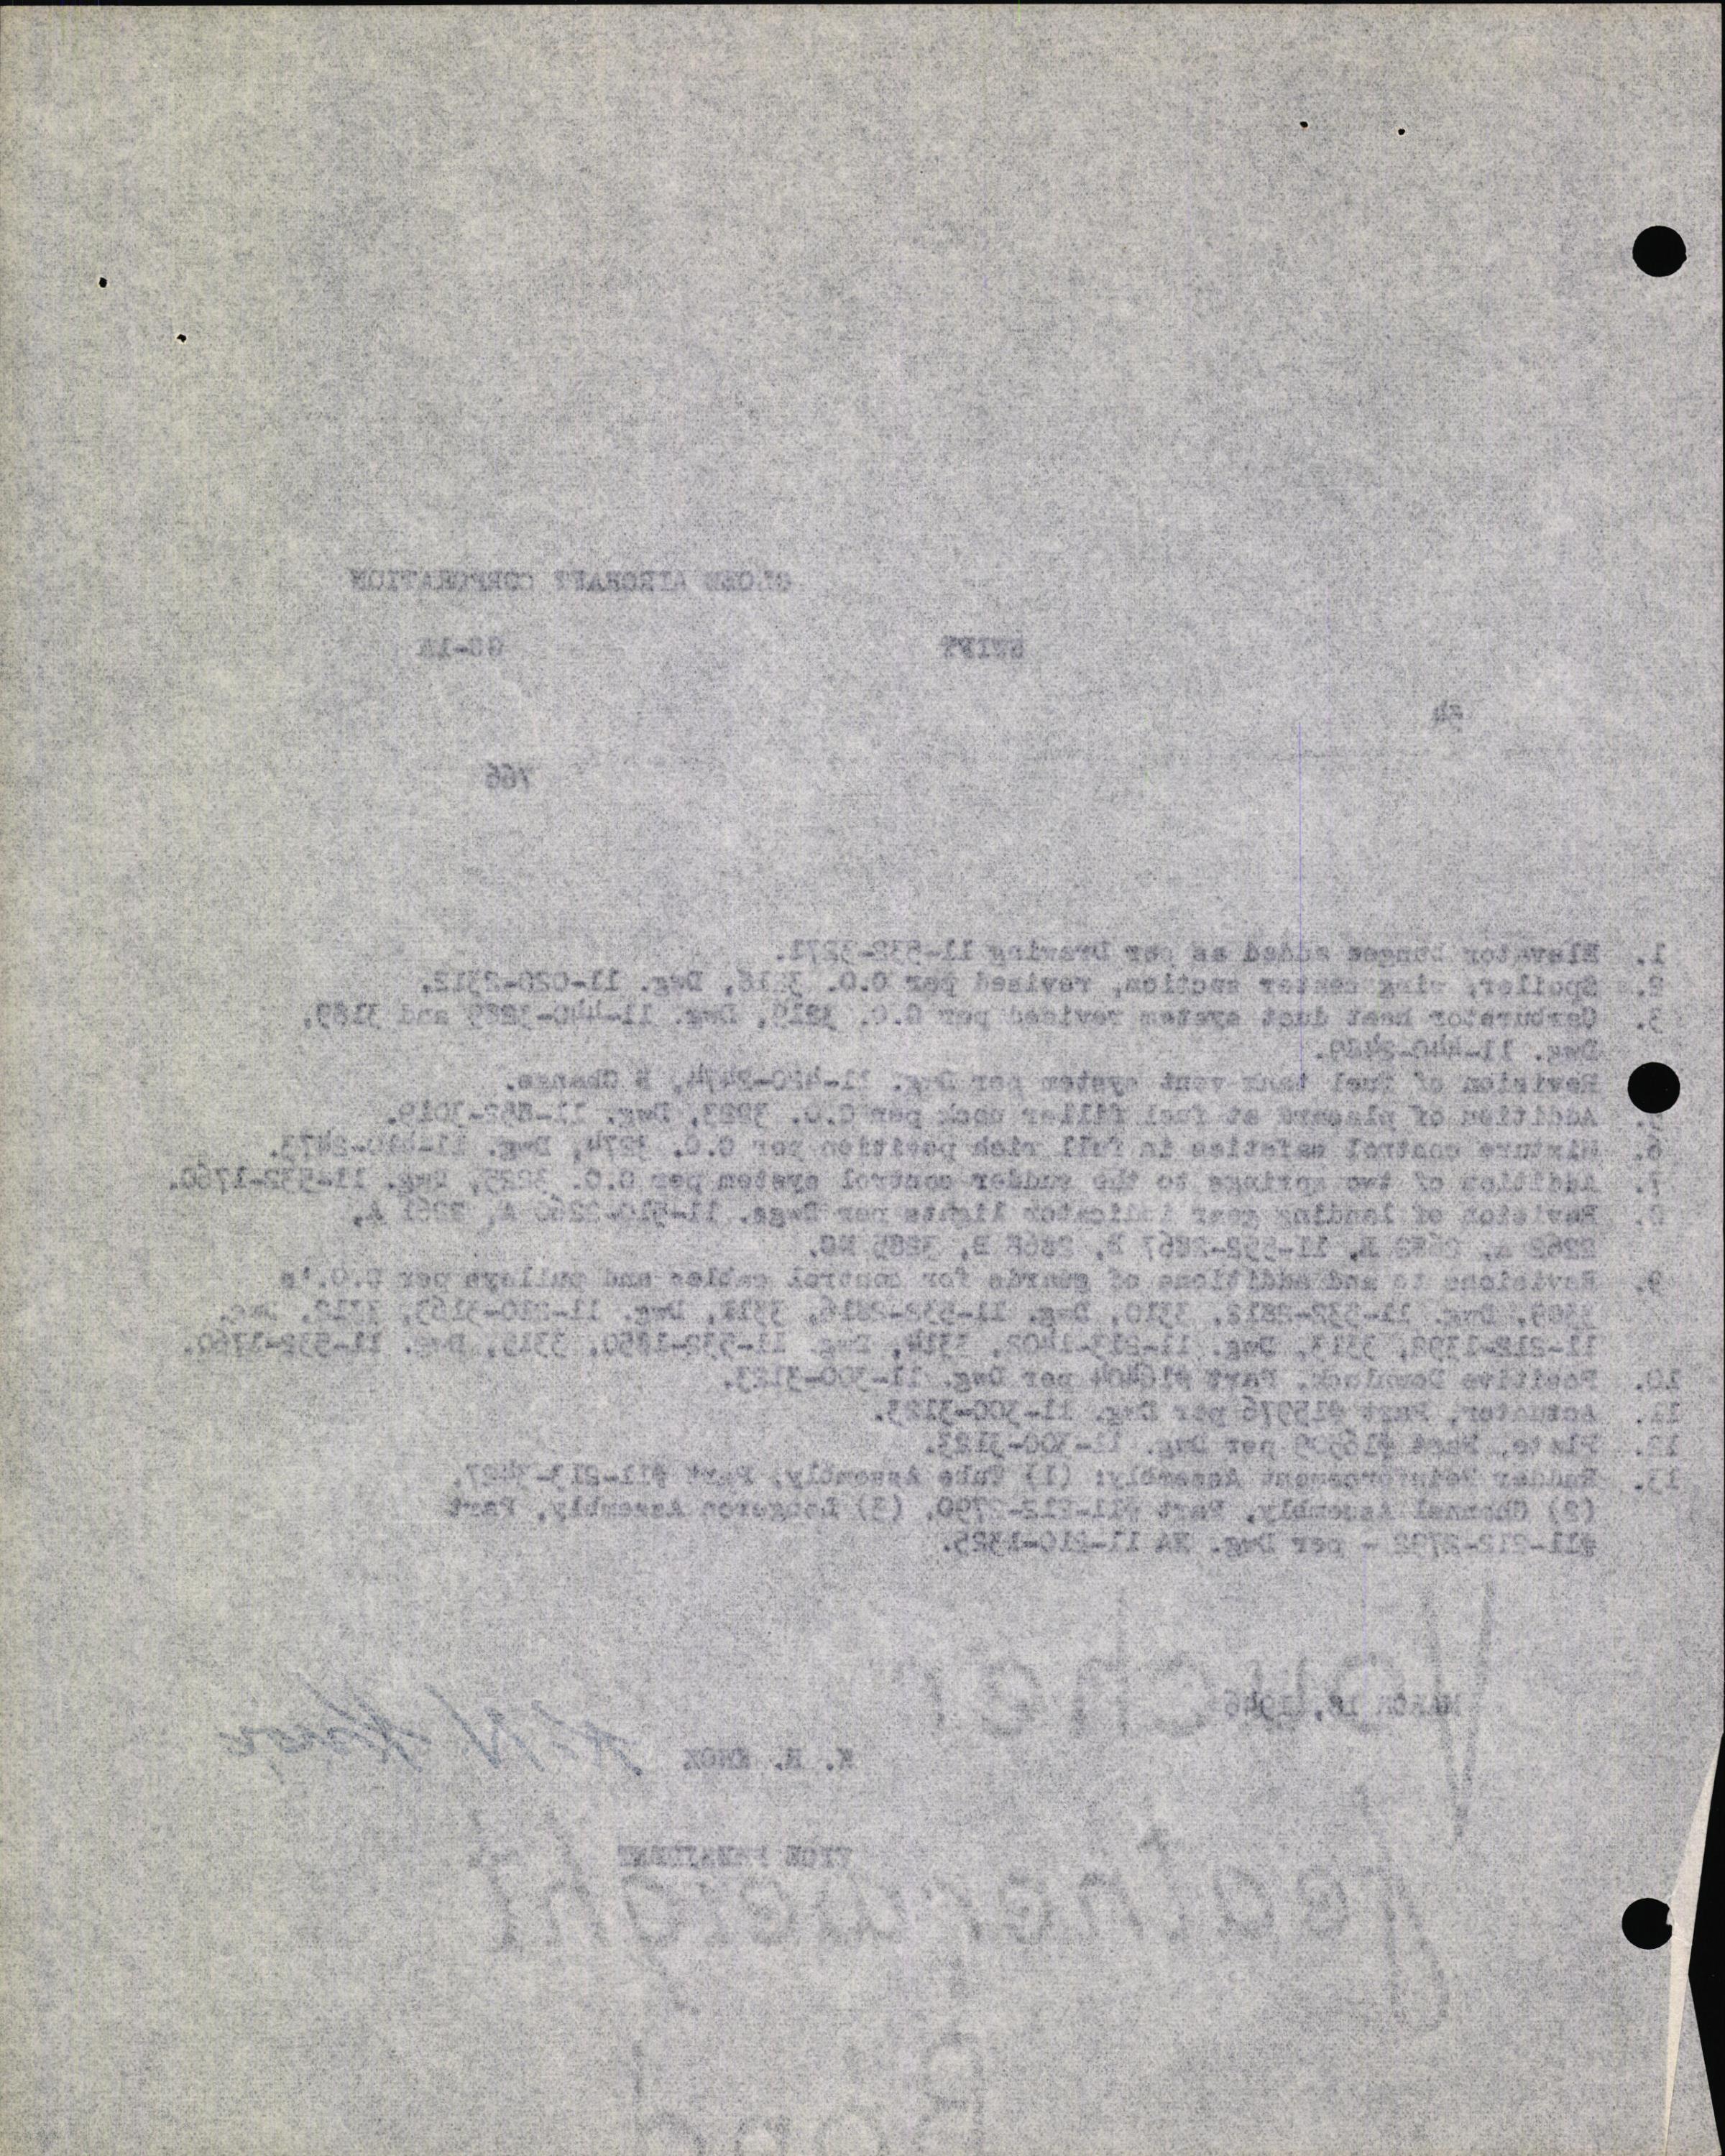 Sample page 6 from AirCorps Library document: Technical Information for Serial Number 54